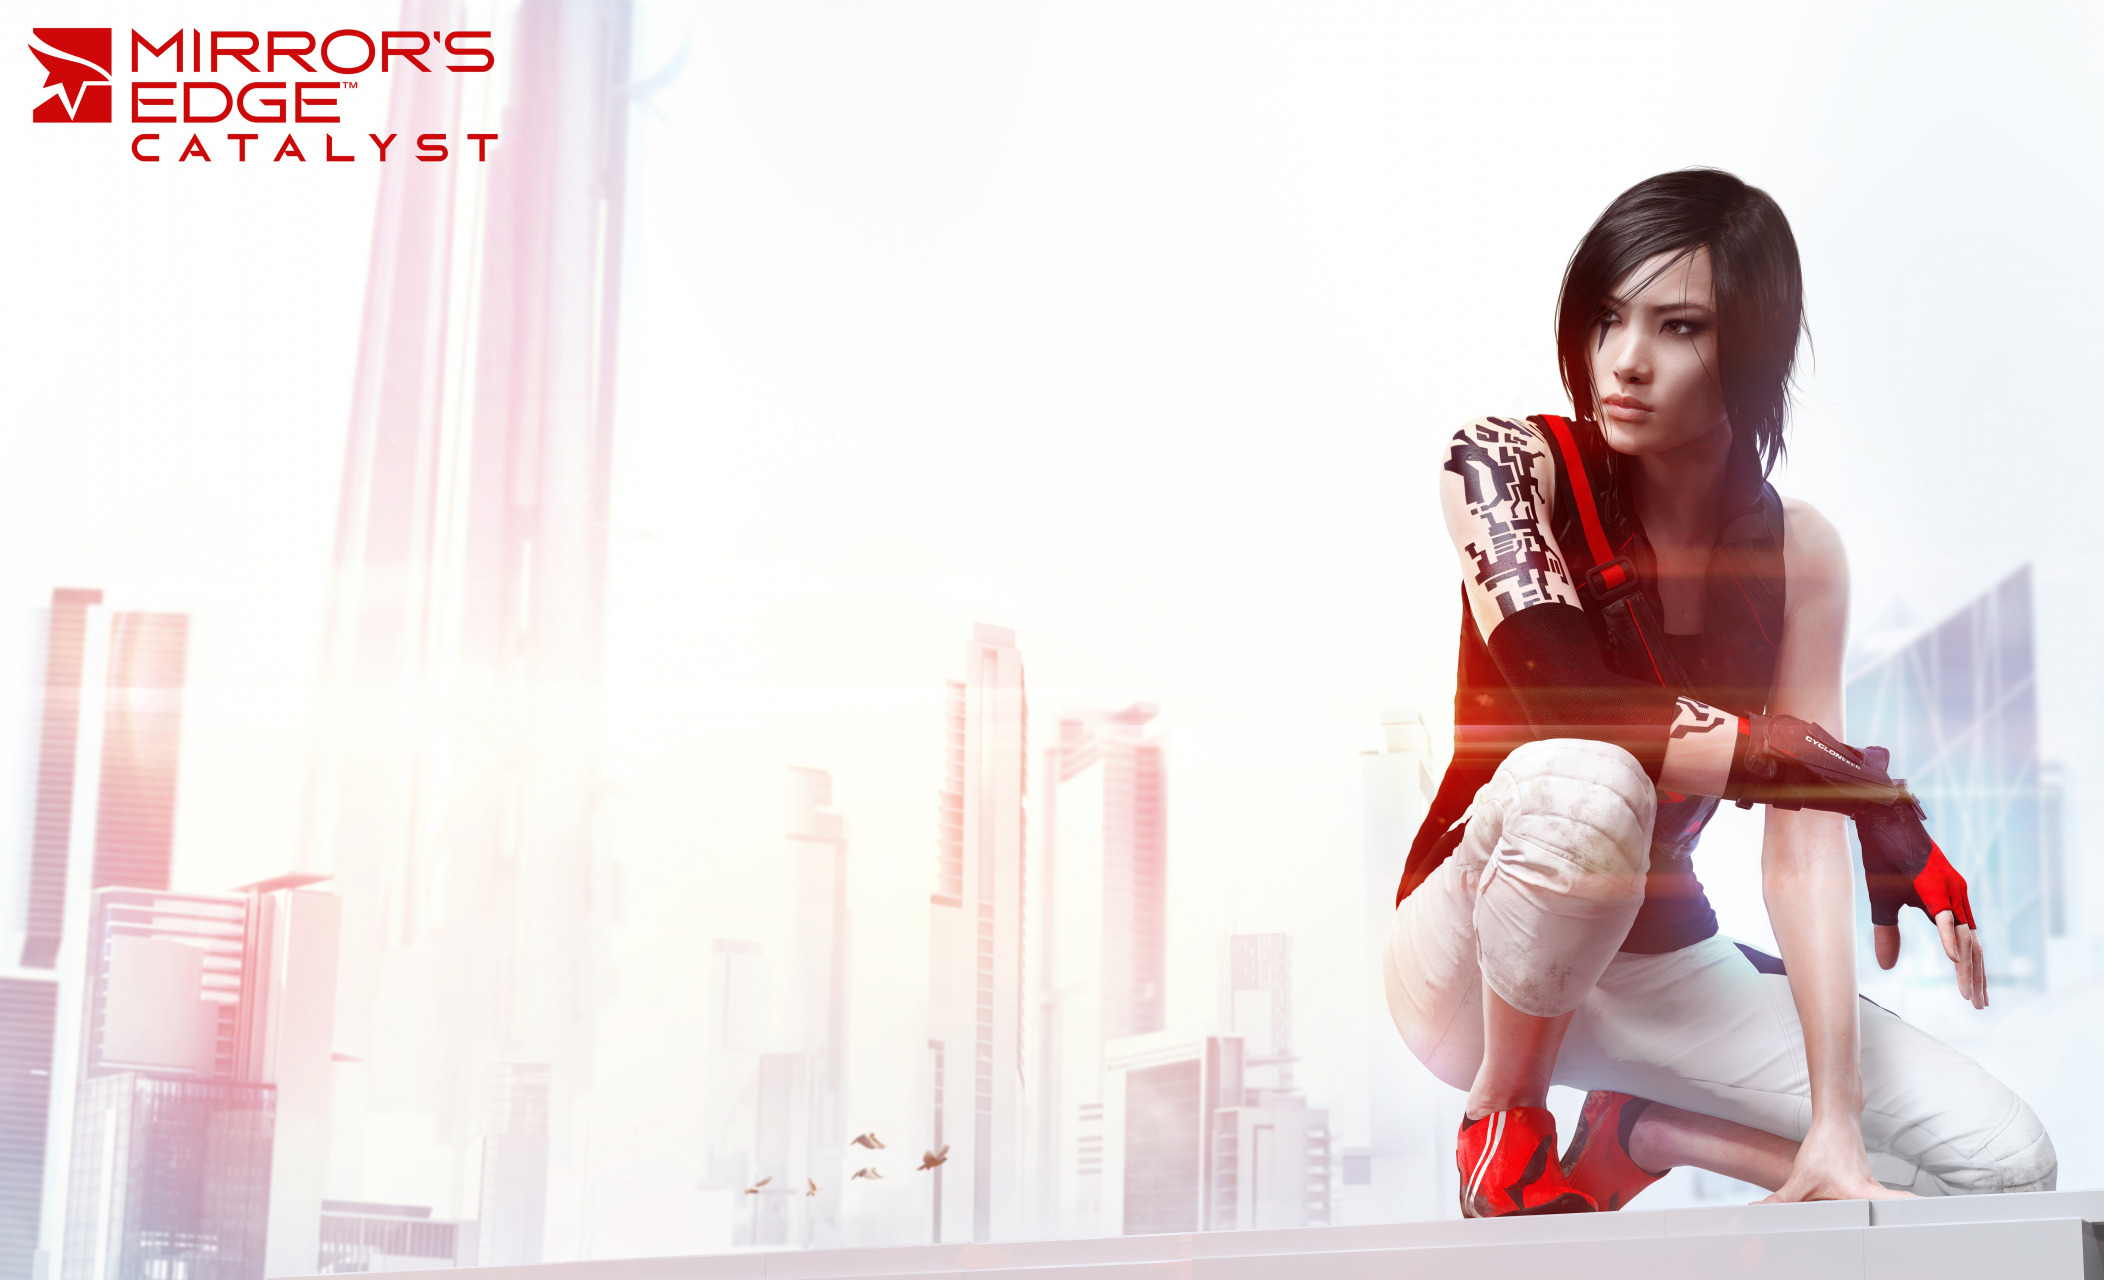 General 2104x1280 Electronic Arts EA DICE Faith Connors short hair Mirror's Edge dark hair Mirror's Edge Catalyst red tank top video game girls tattoo fingerless gloves parkour looking away white jeans video games Elbow Pads black hair video game characters